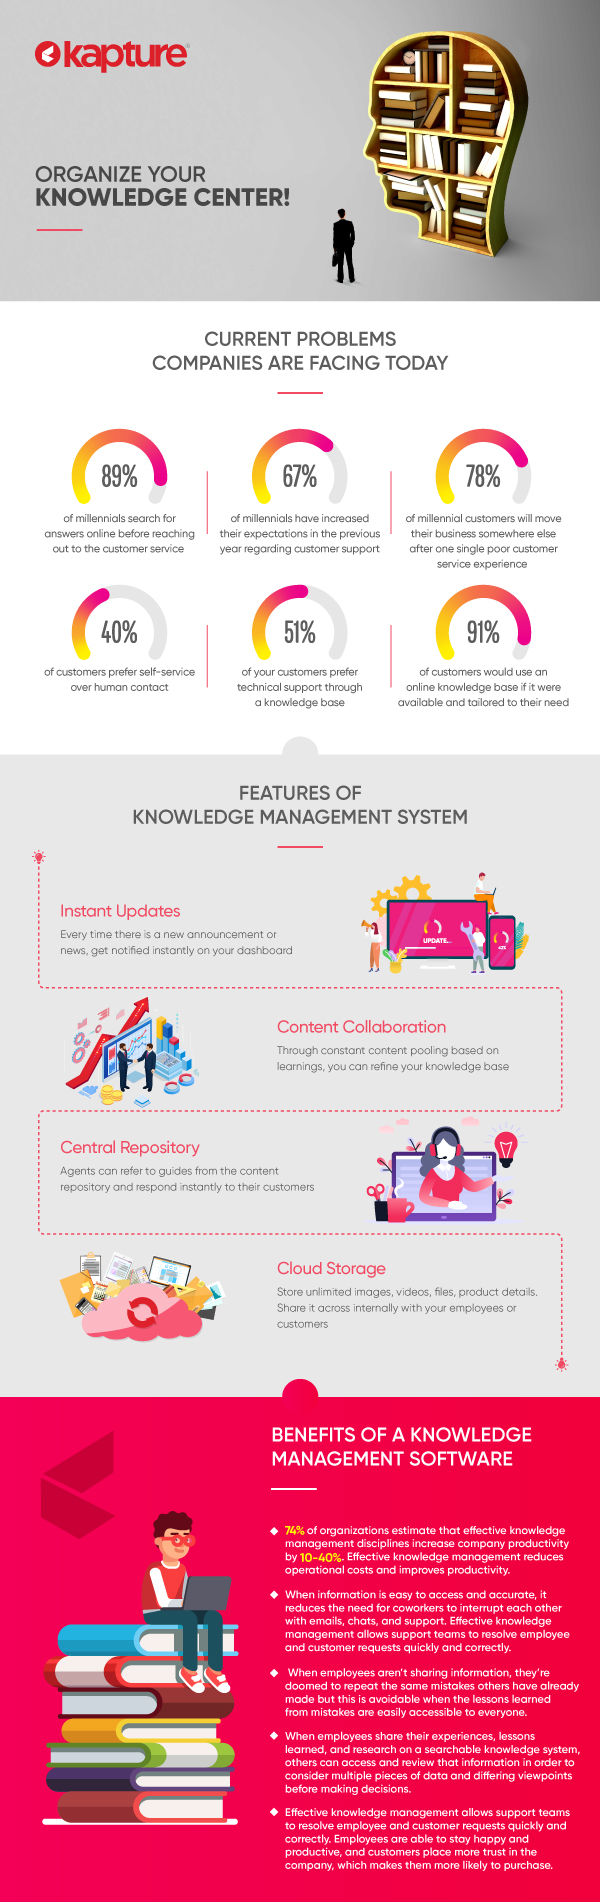 Features & Benefits of Knowledge Management Software System